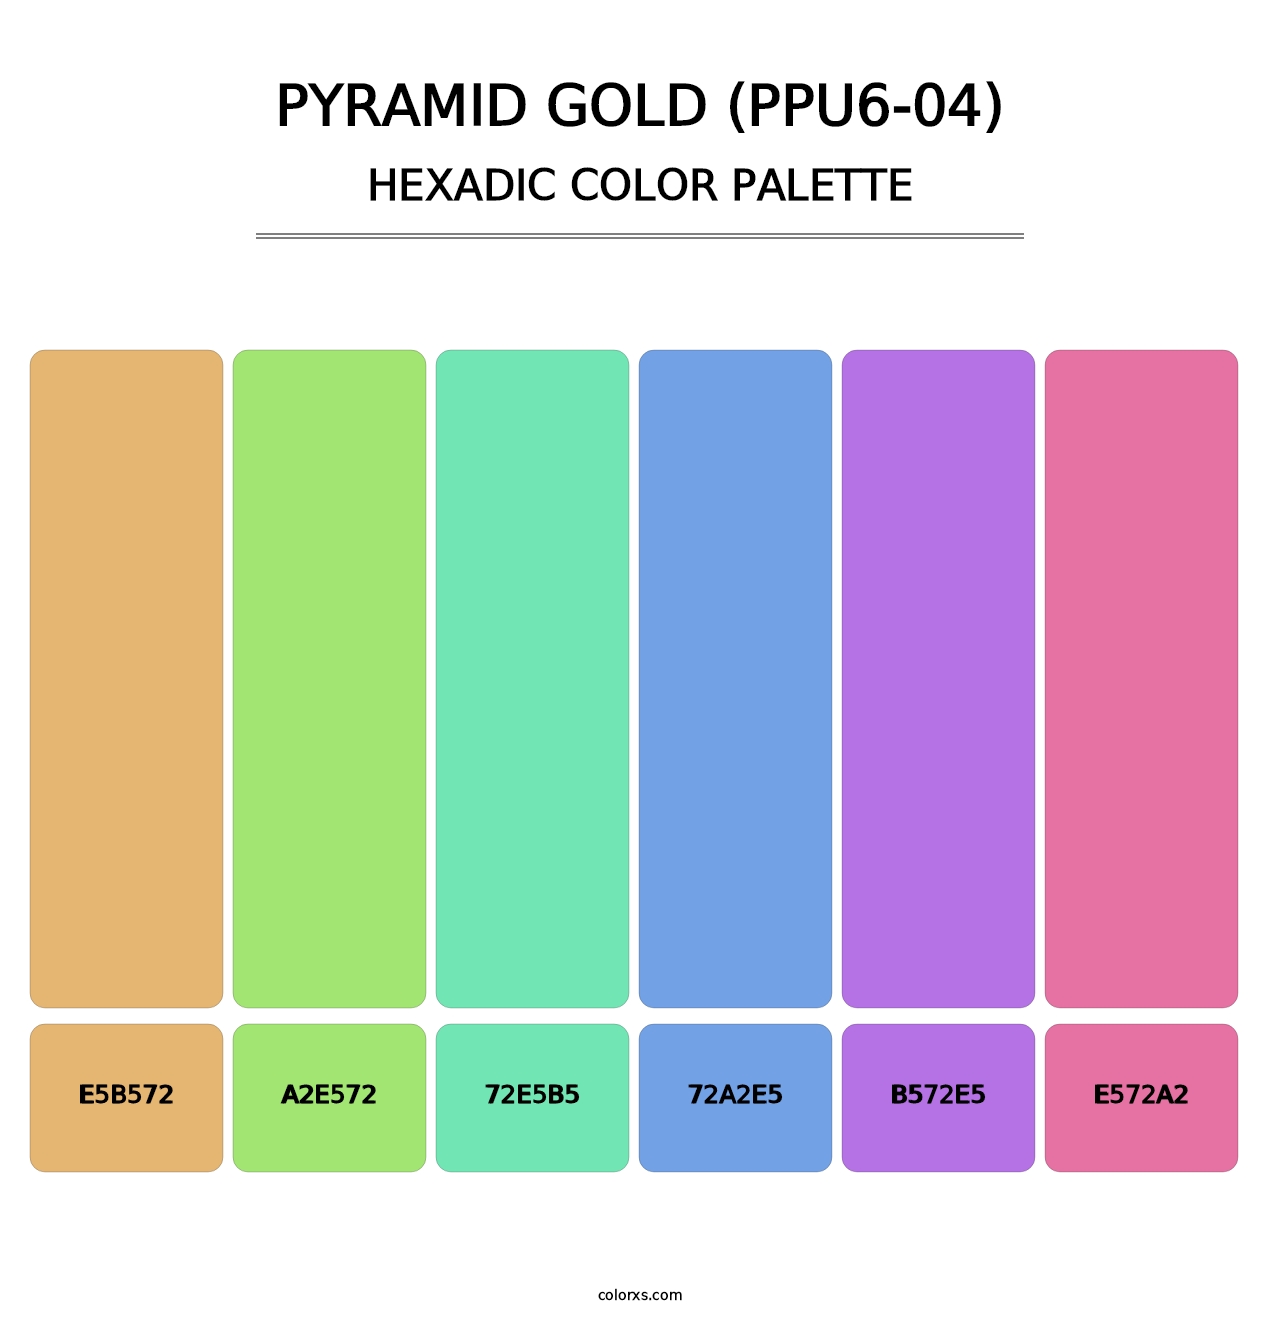 Pyramid Gold (PPU6-04) - Hexadic Color Palette